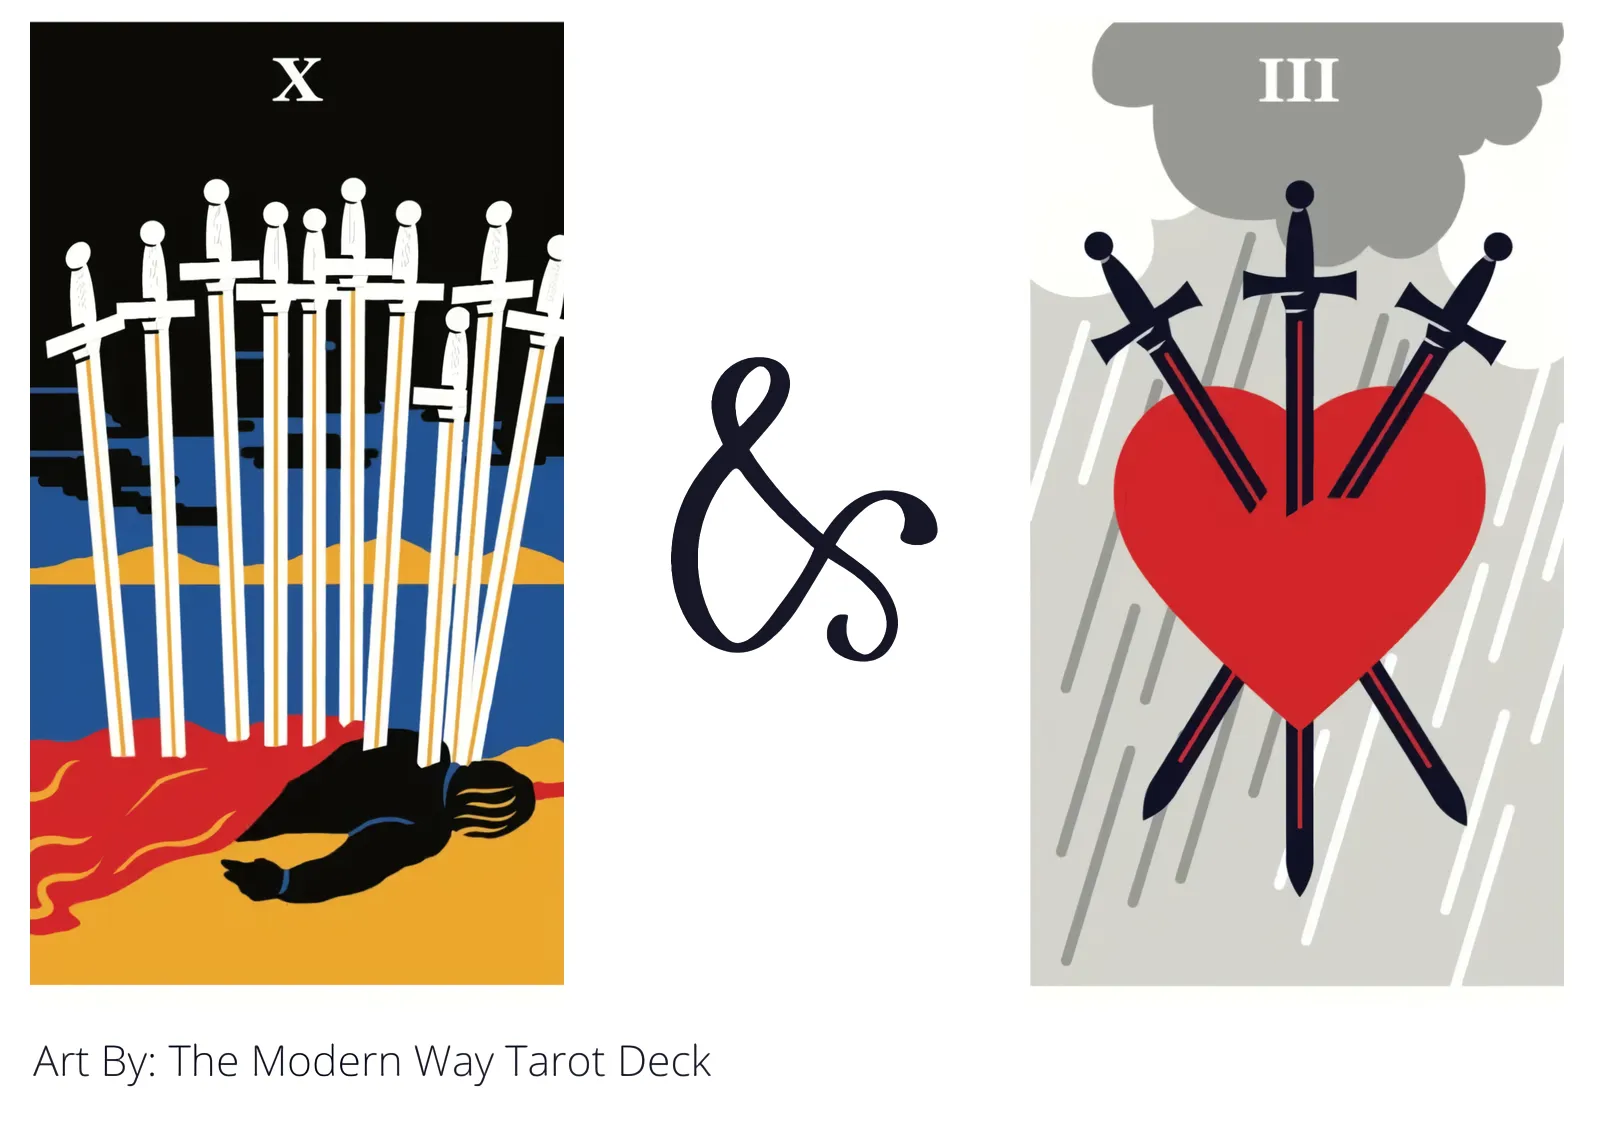 ten of swords and three of swords tarot cards together